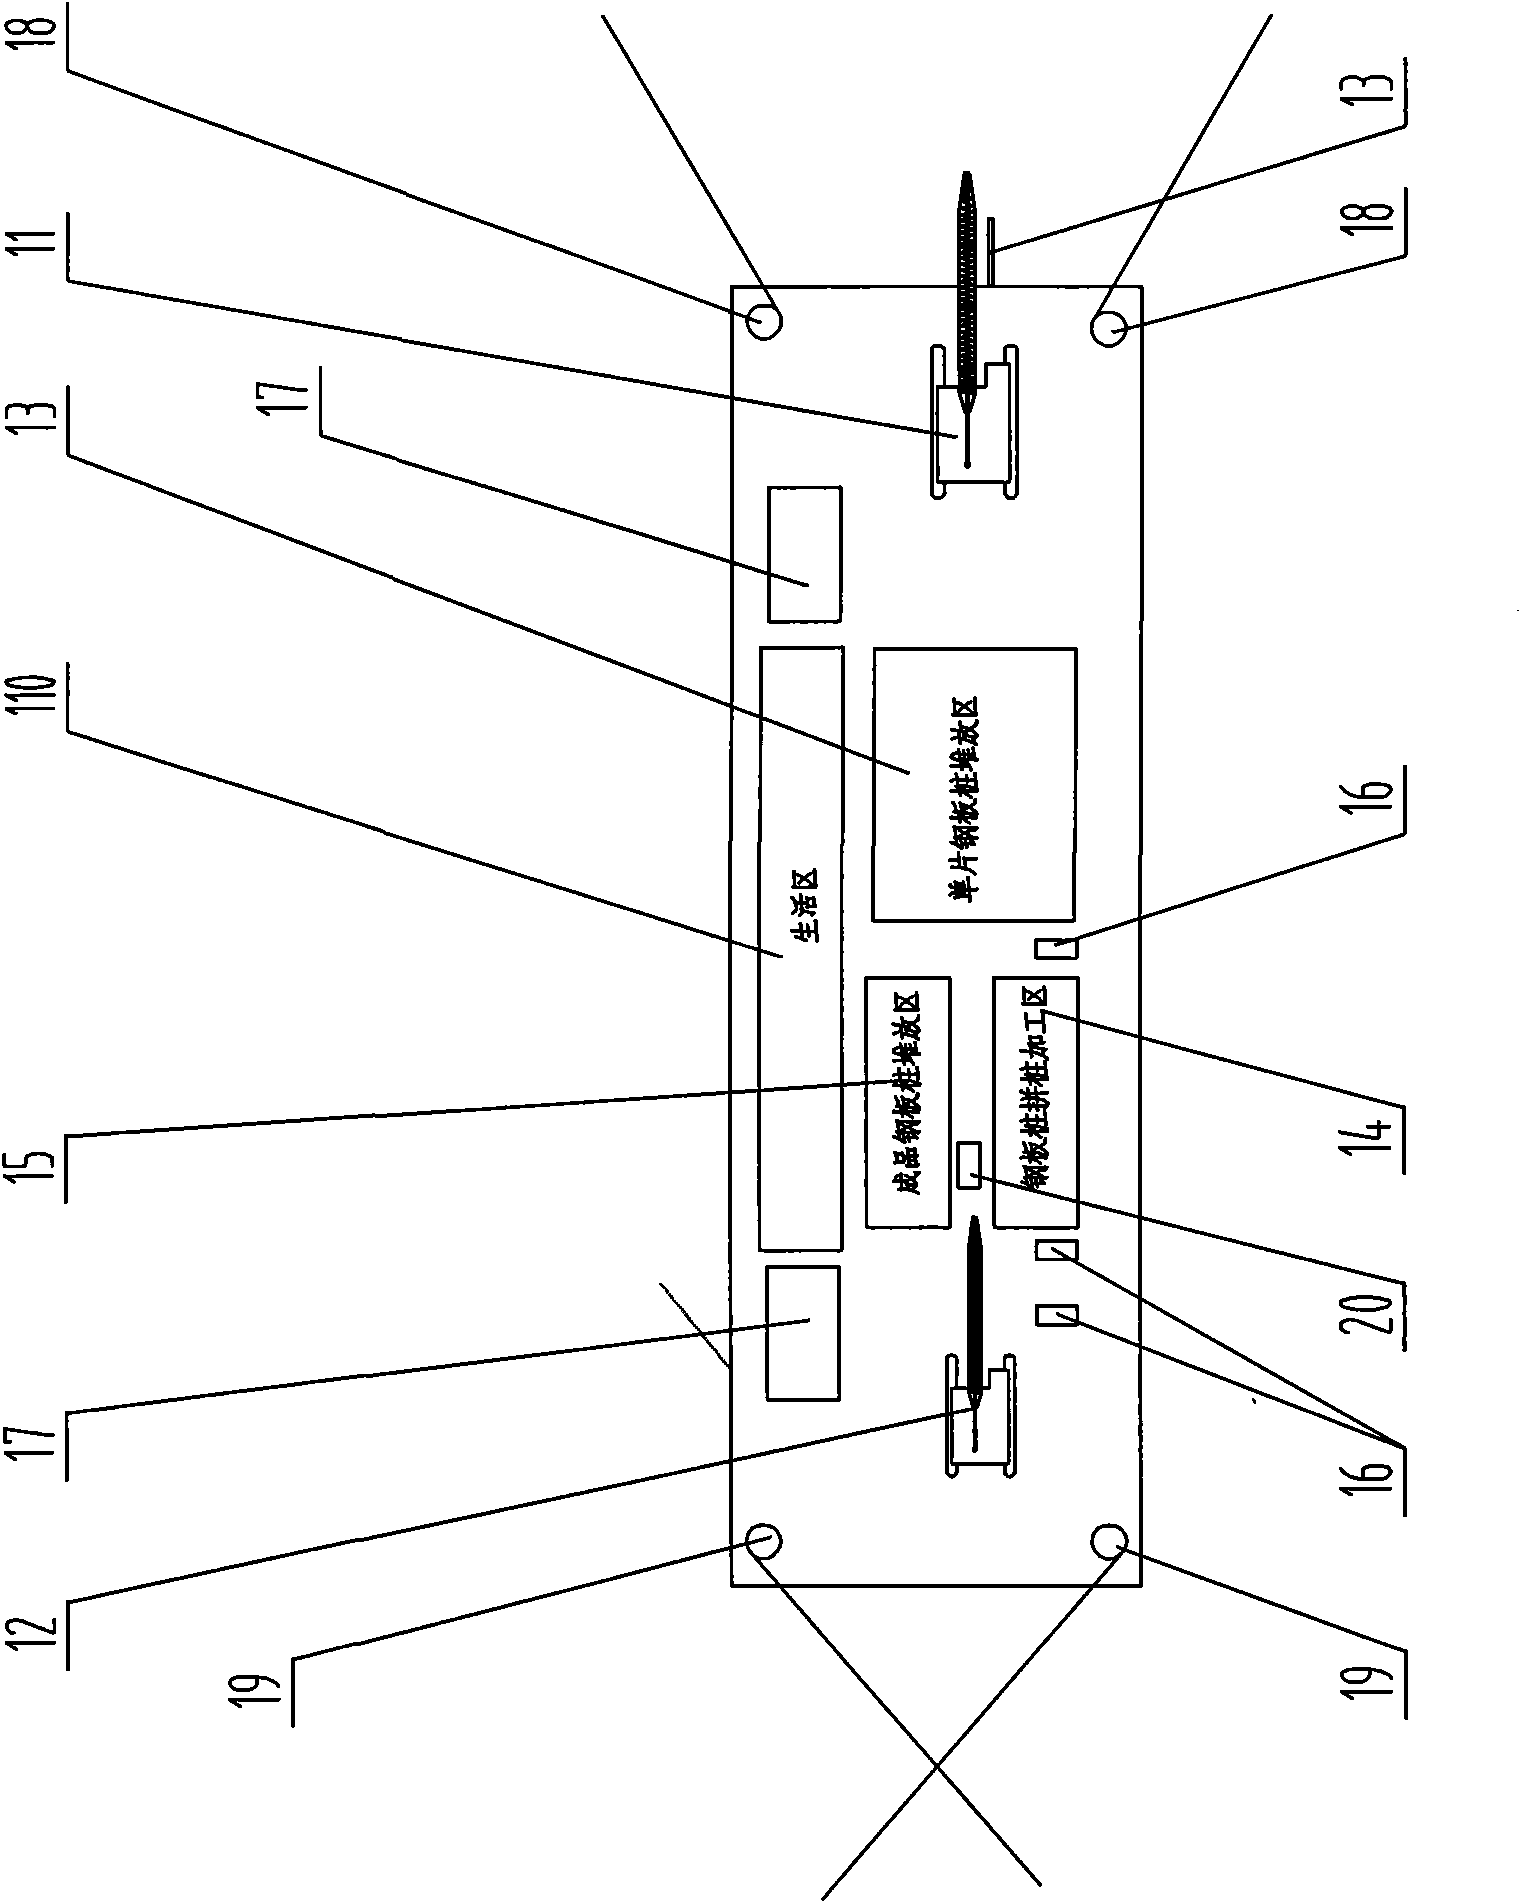 Method of pile-assembly and pile-pressing of double crane pile driving barge for construction of off-shore artificial island